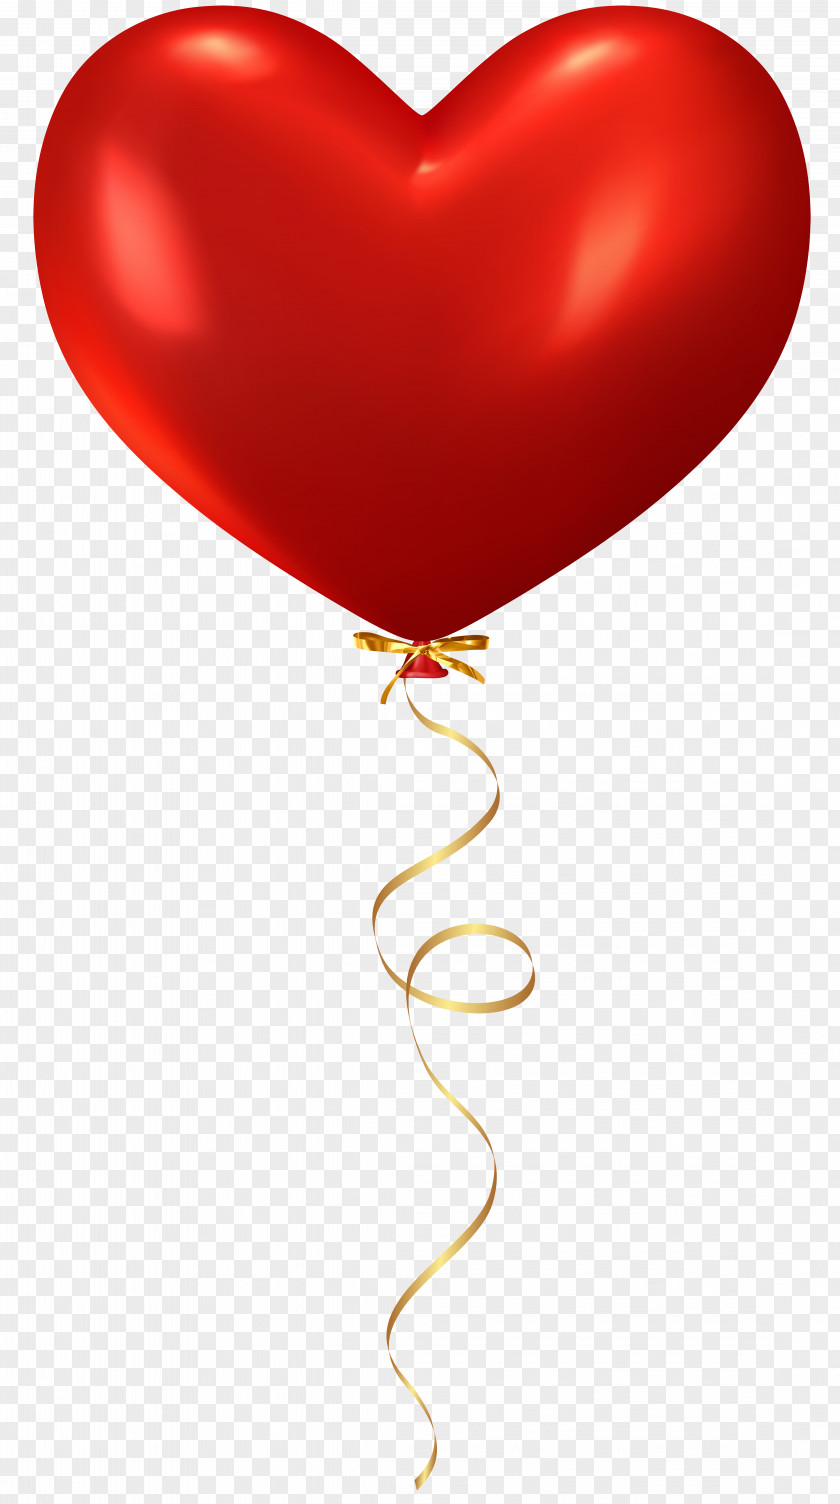 Toy Party Supply Red Balloons PNG